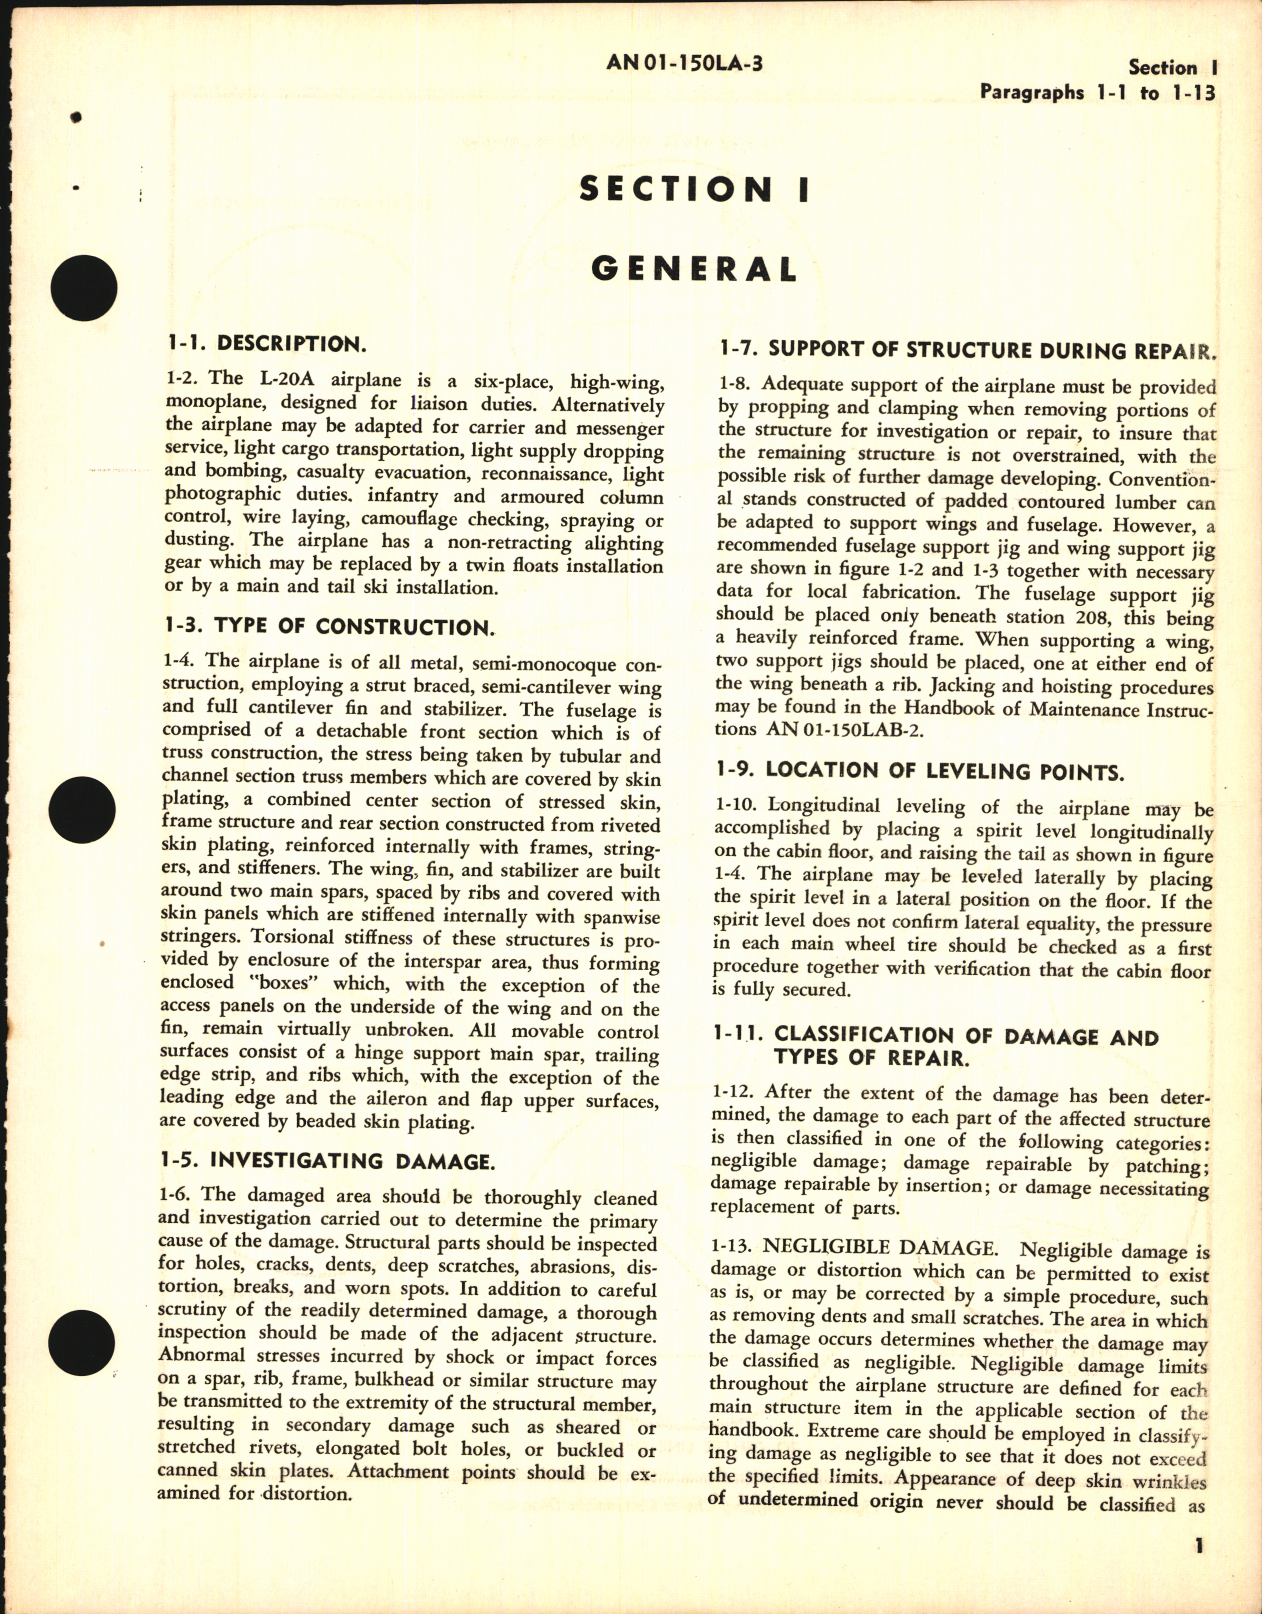 Sample page 7 from AirCorps Library document: Structural Repair Instructions for L-20A